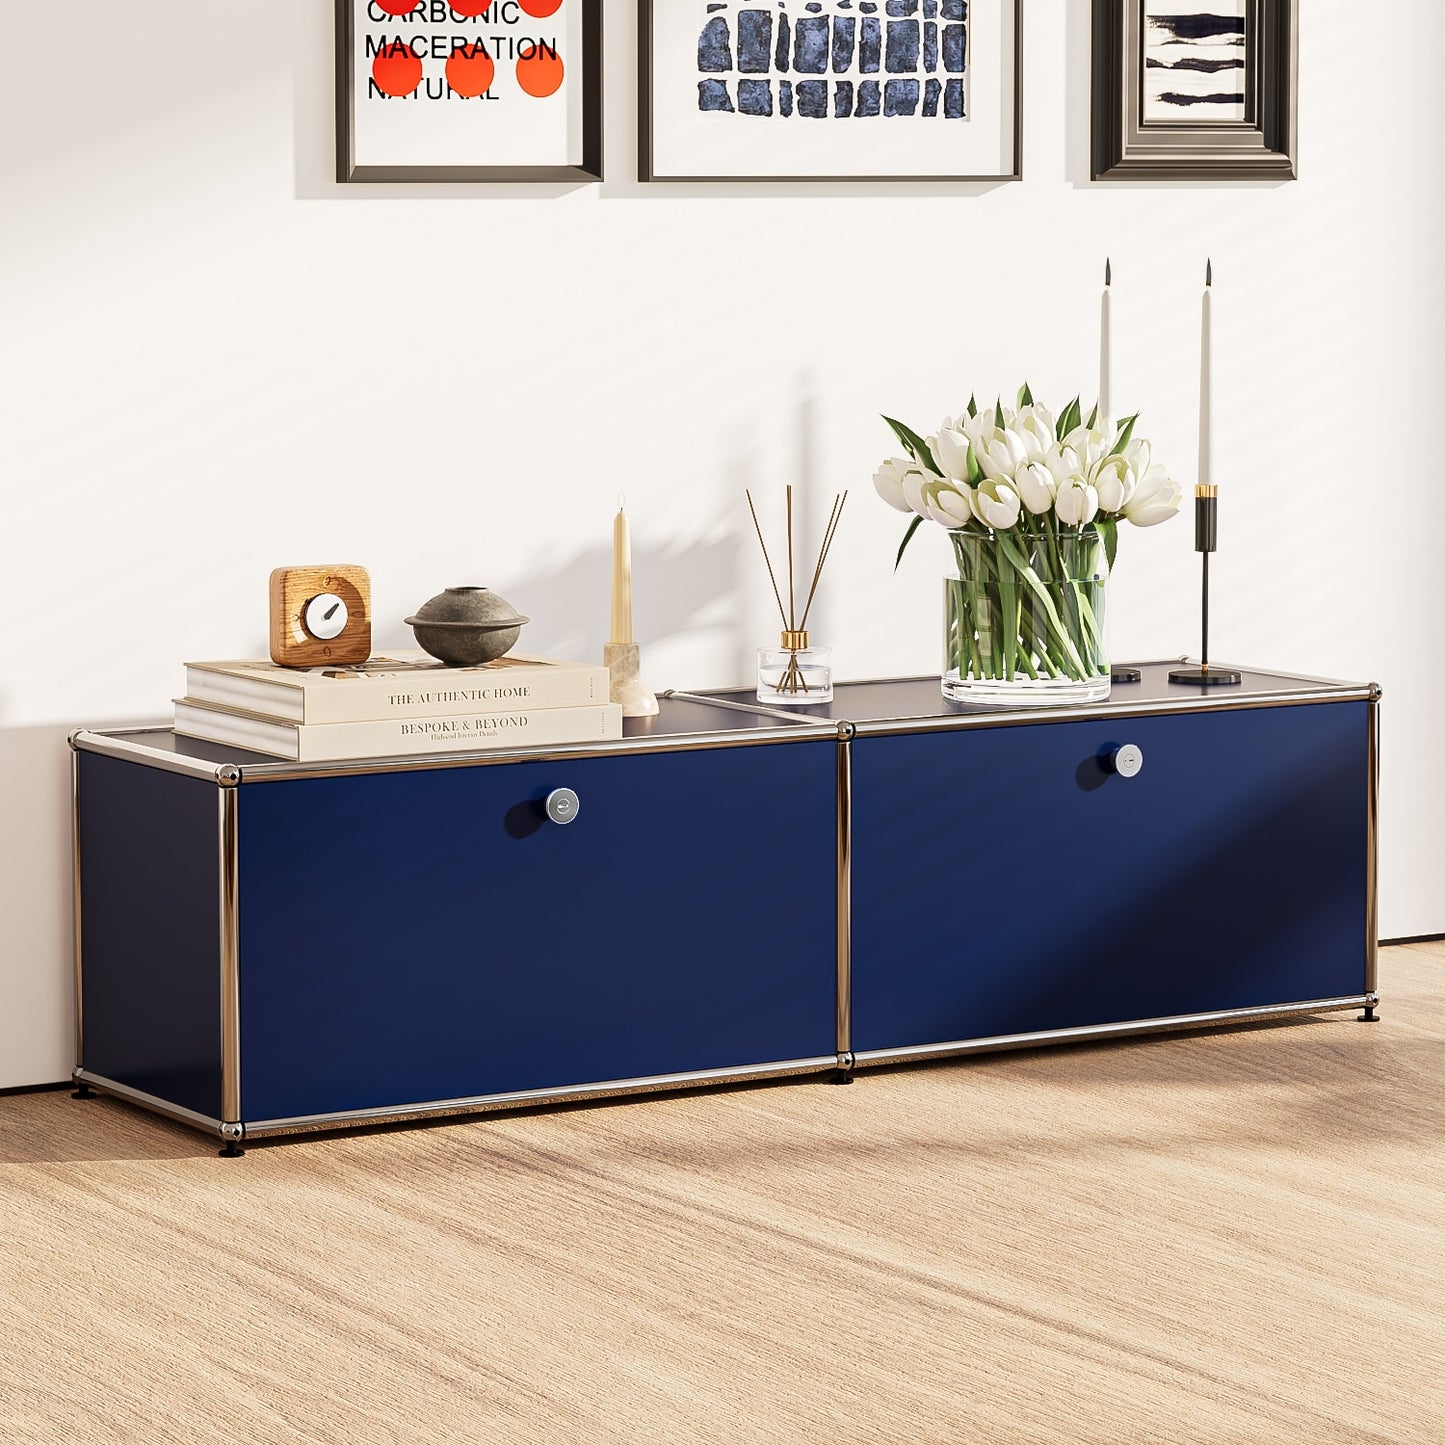 Stainless Steel Modular Storage Cabinet With 2/3/6 Haller Shelf Sideboard, Customized Size, Night Stand   Use everywhere more covered storage space is desirable.